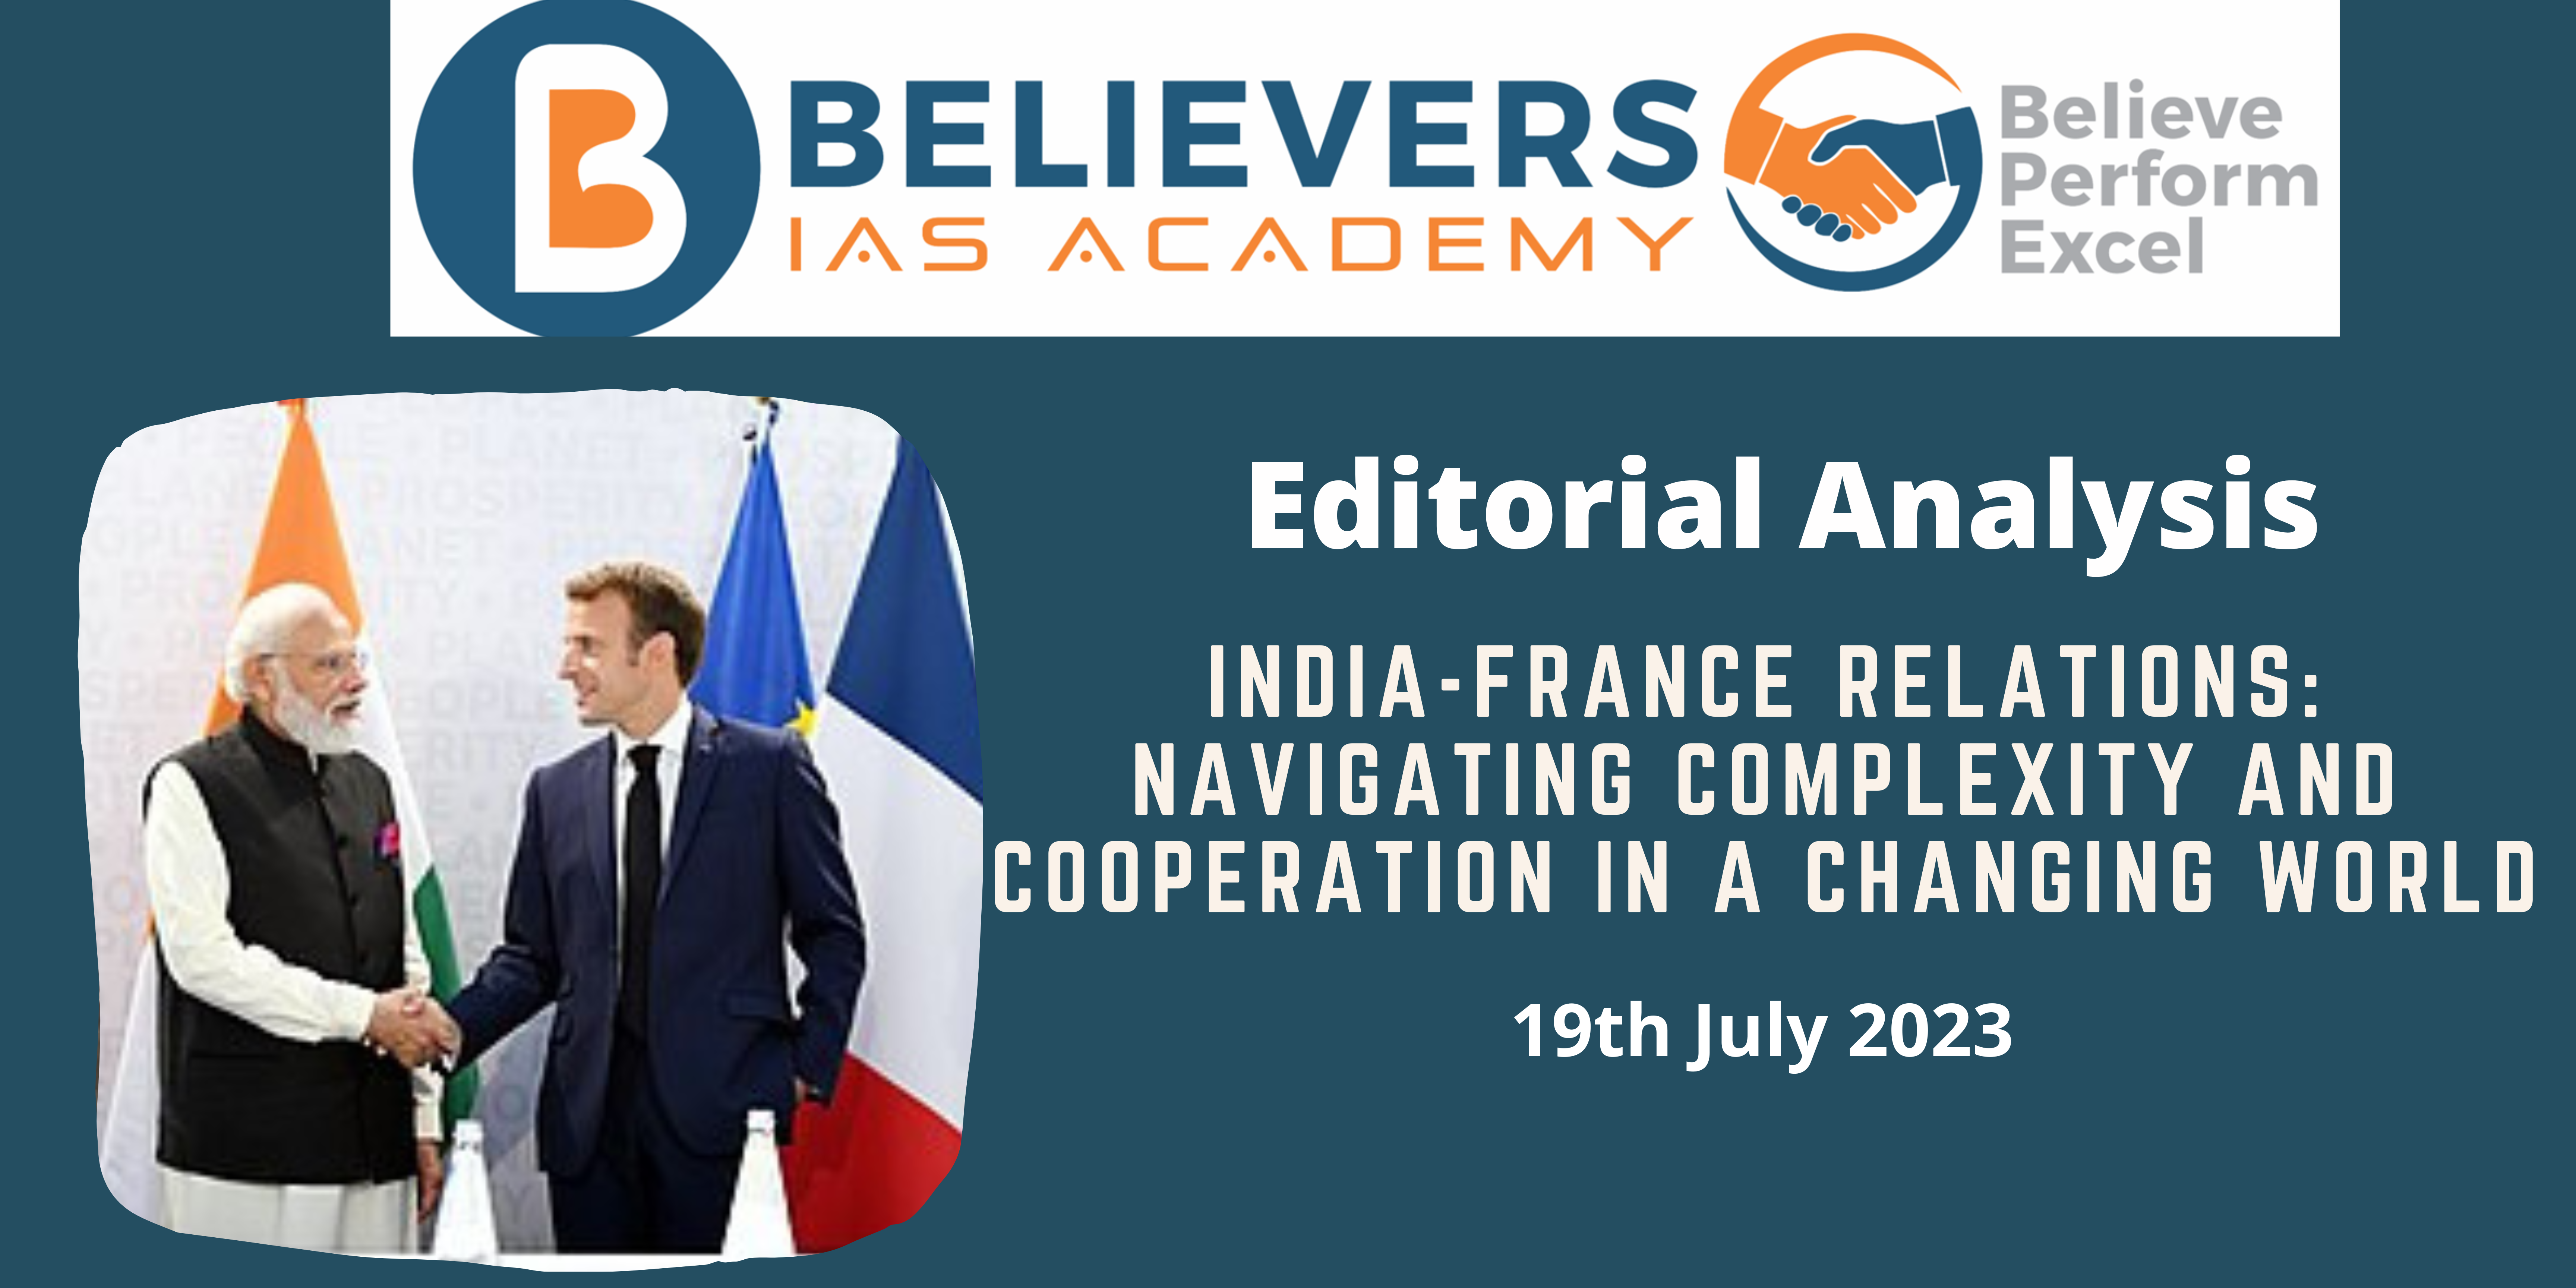 India-France Relations: Navigating Complexity and Cooperation in a Changing World